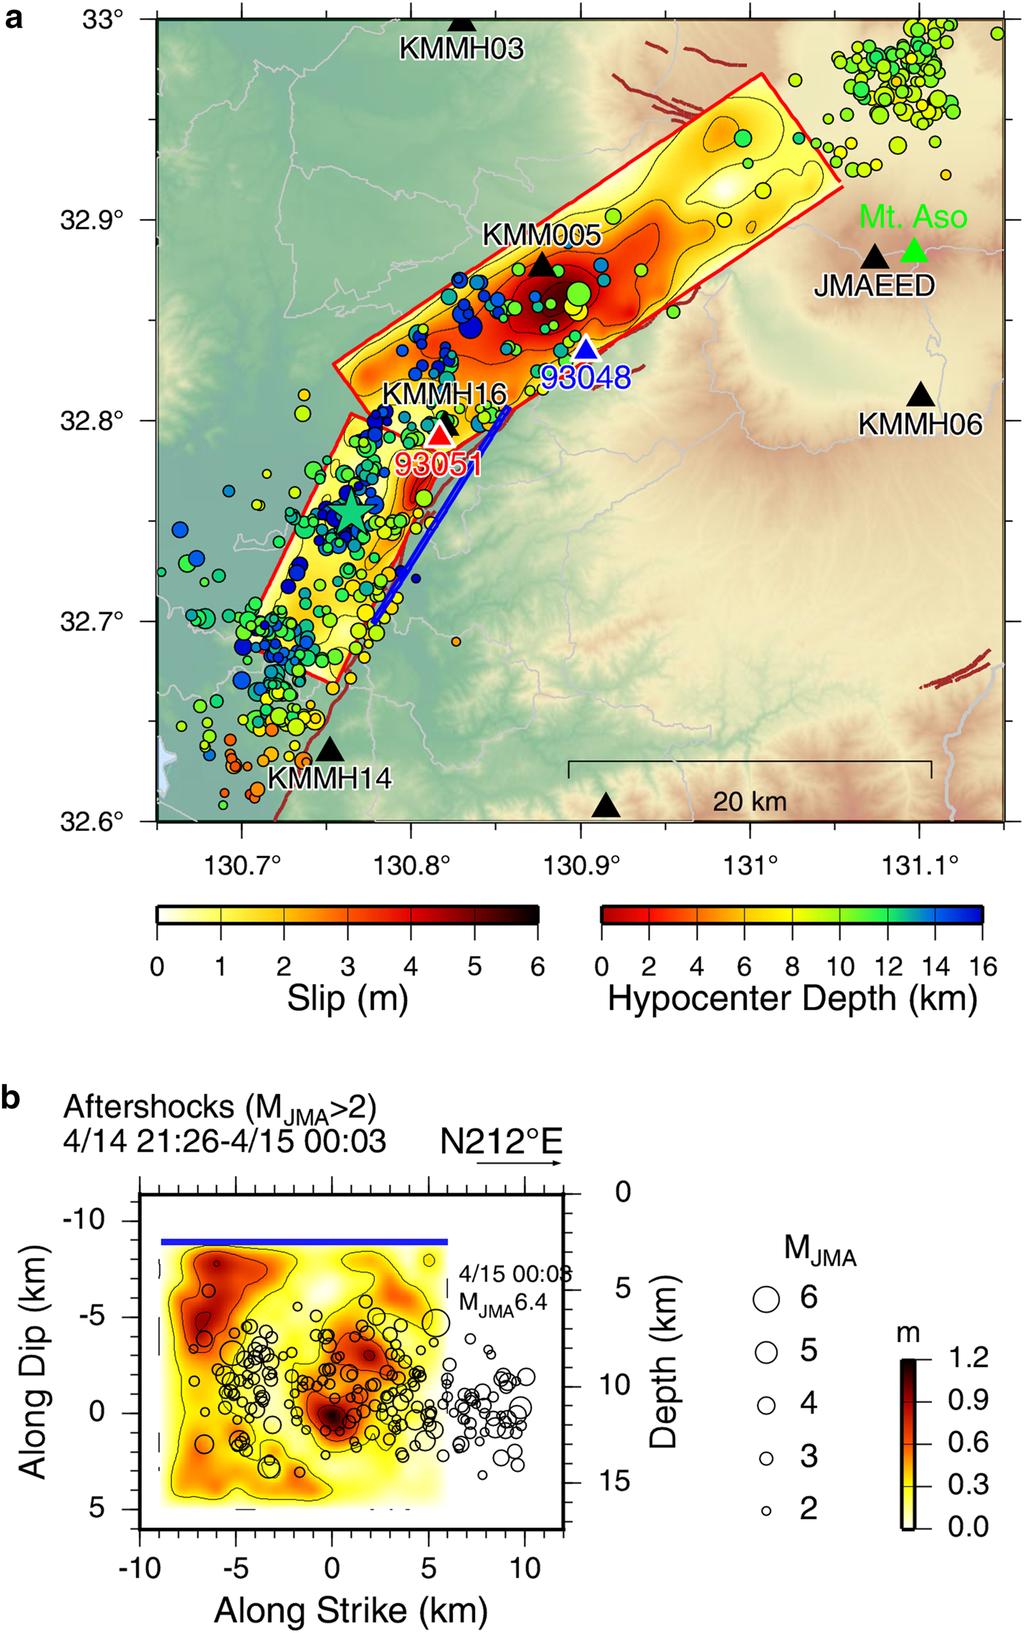 Asano and Iwata Earth, Planets and Space (2016) 68:147 Page 10 of 11 Fig. 8 Comparison between spatial slip distributions and aftershocks.